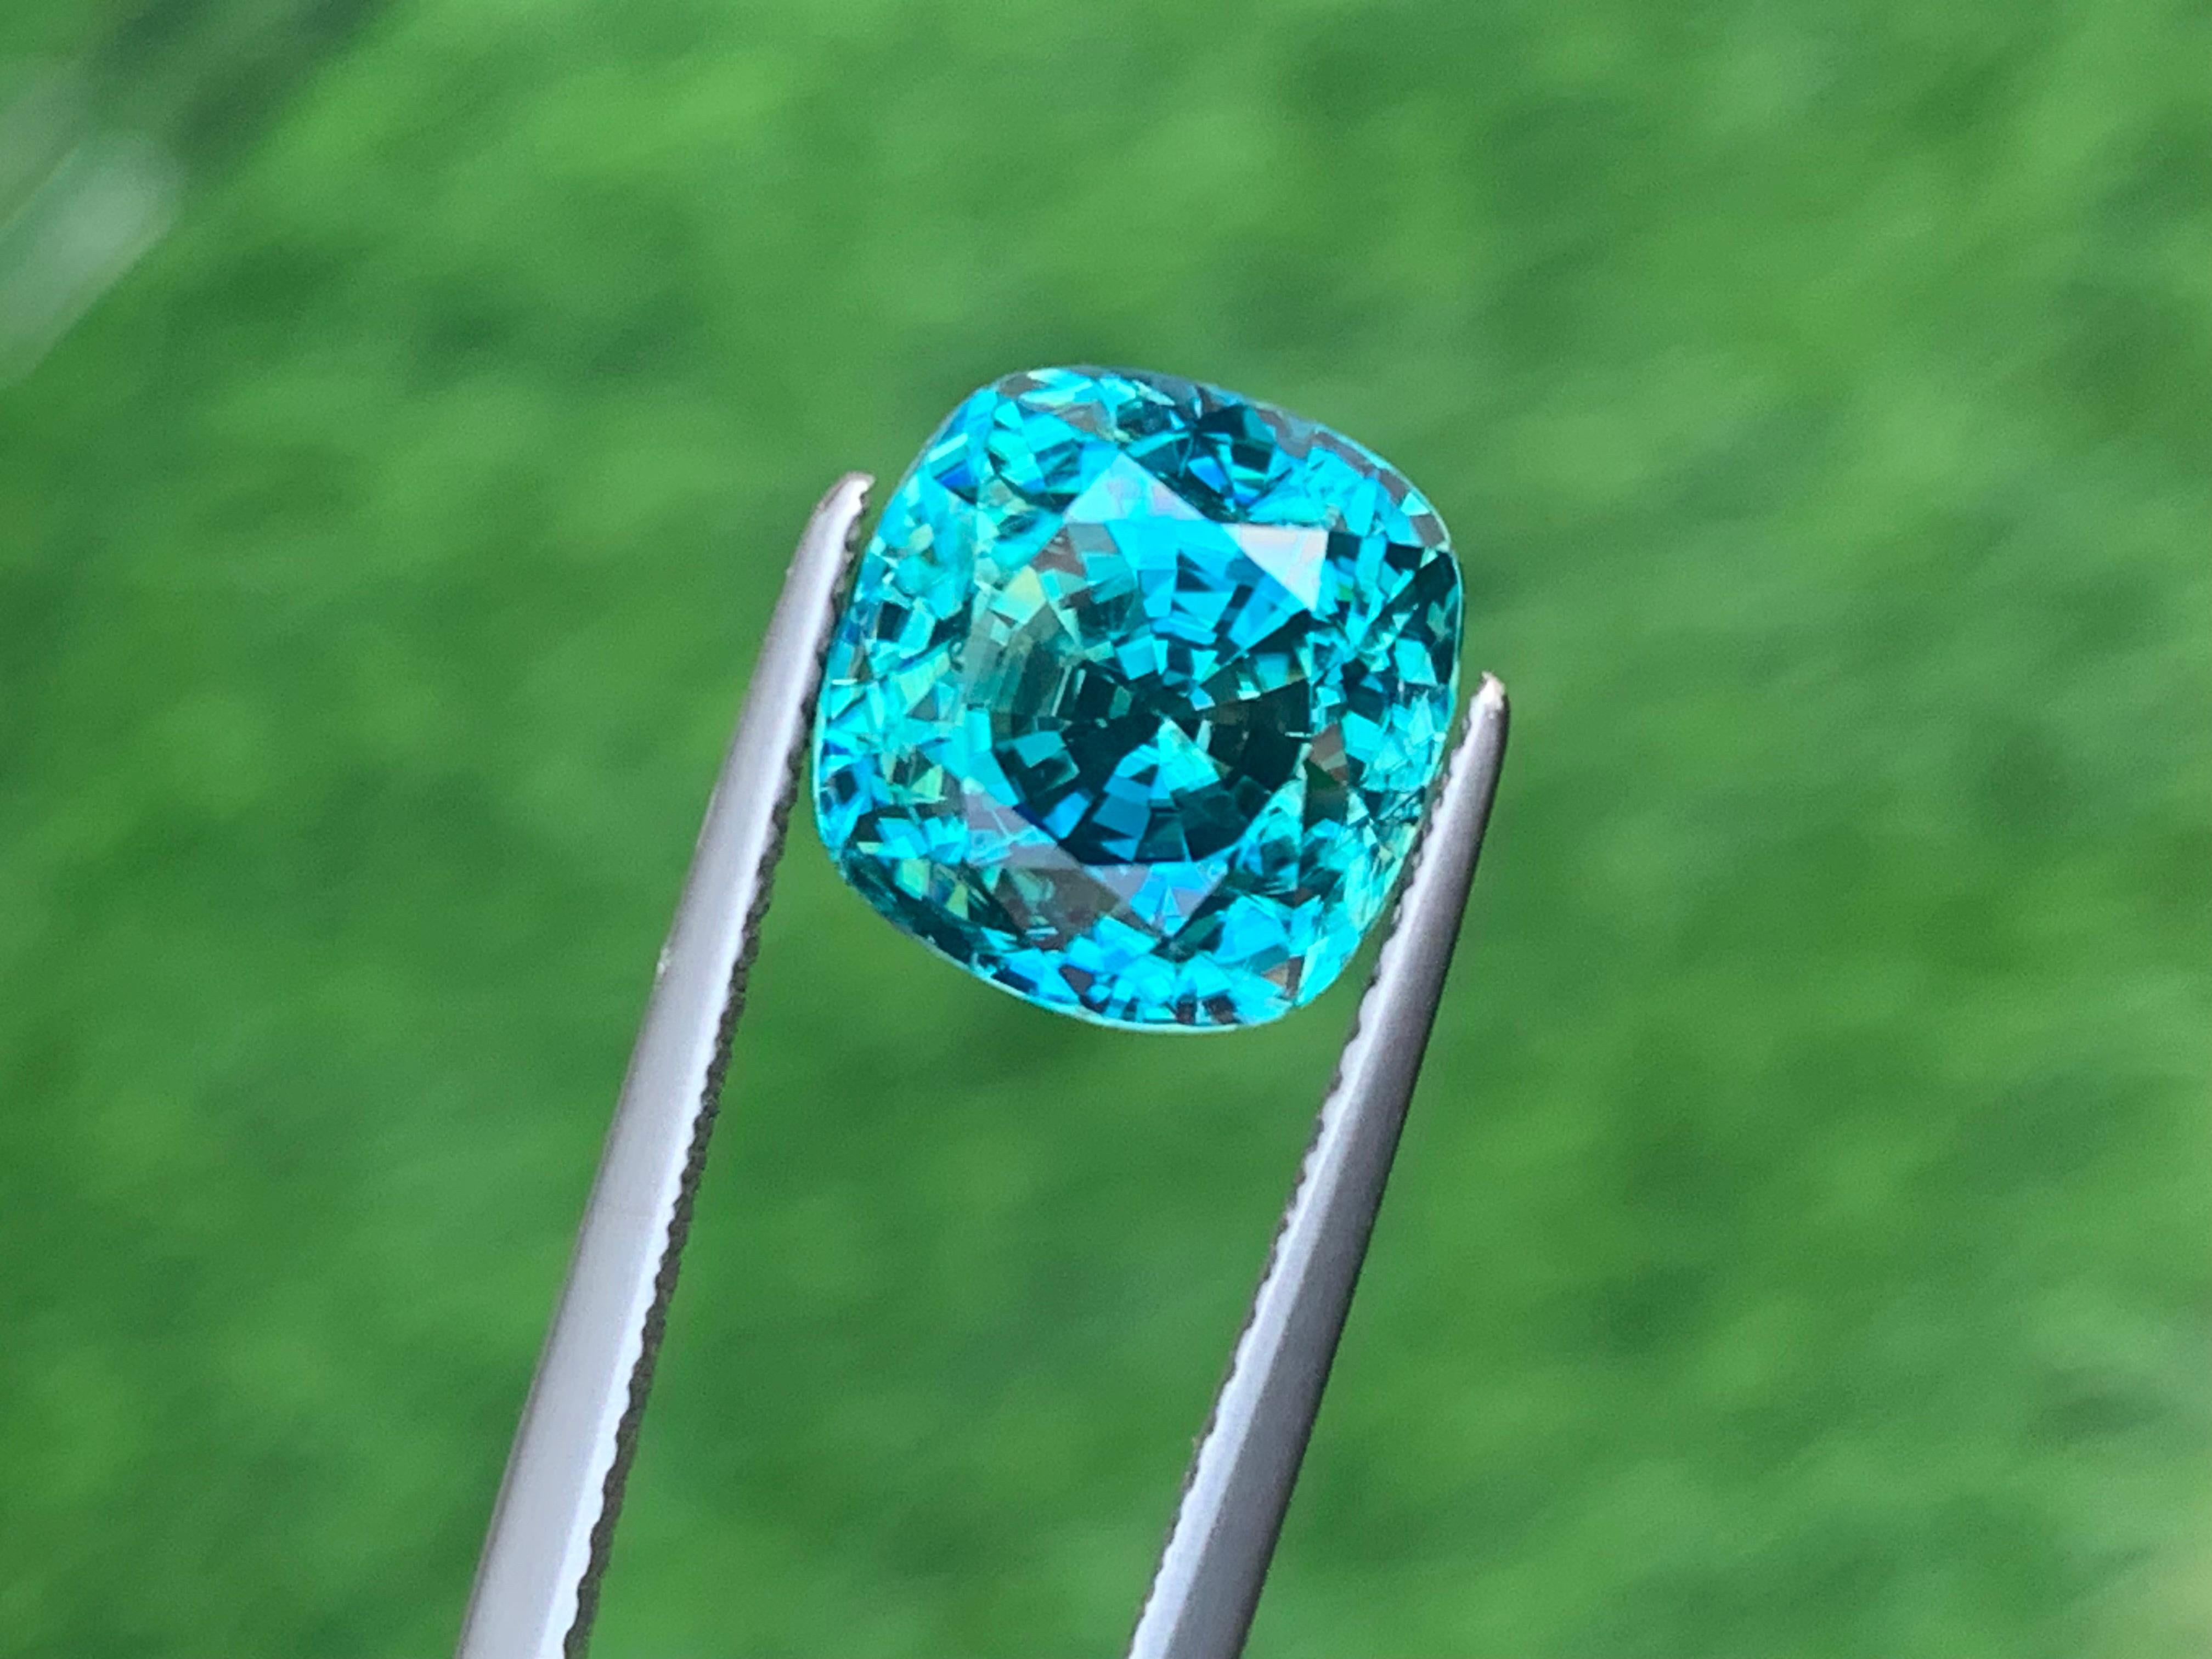 Antique Cushion Cut 8.55 Carat Majestic Natural Loose Blue Zircon From Cambodia For Jewelry Making For Sale